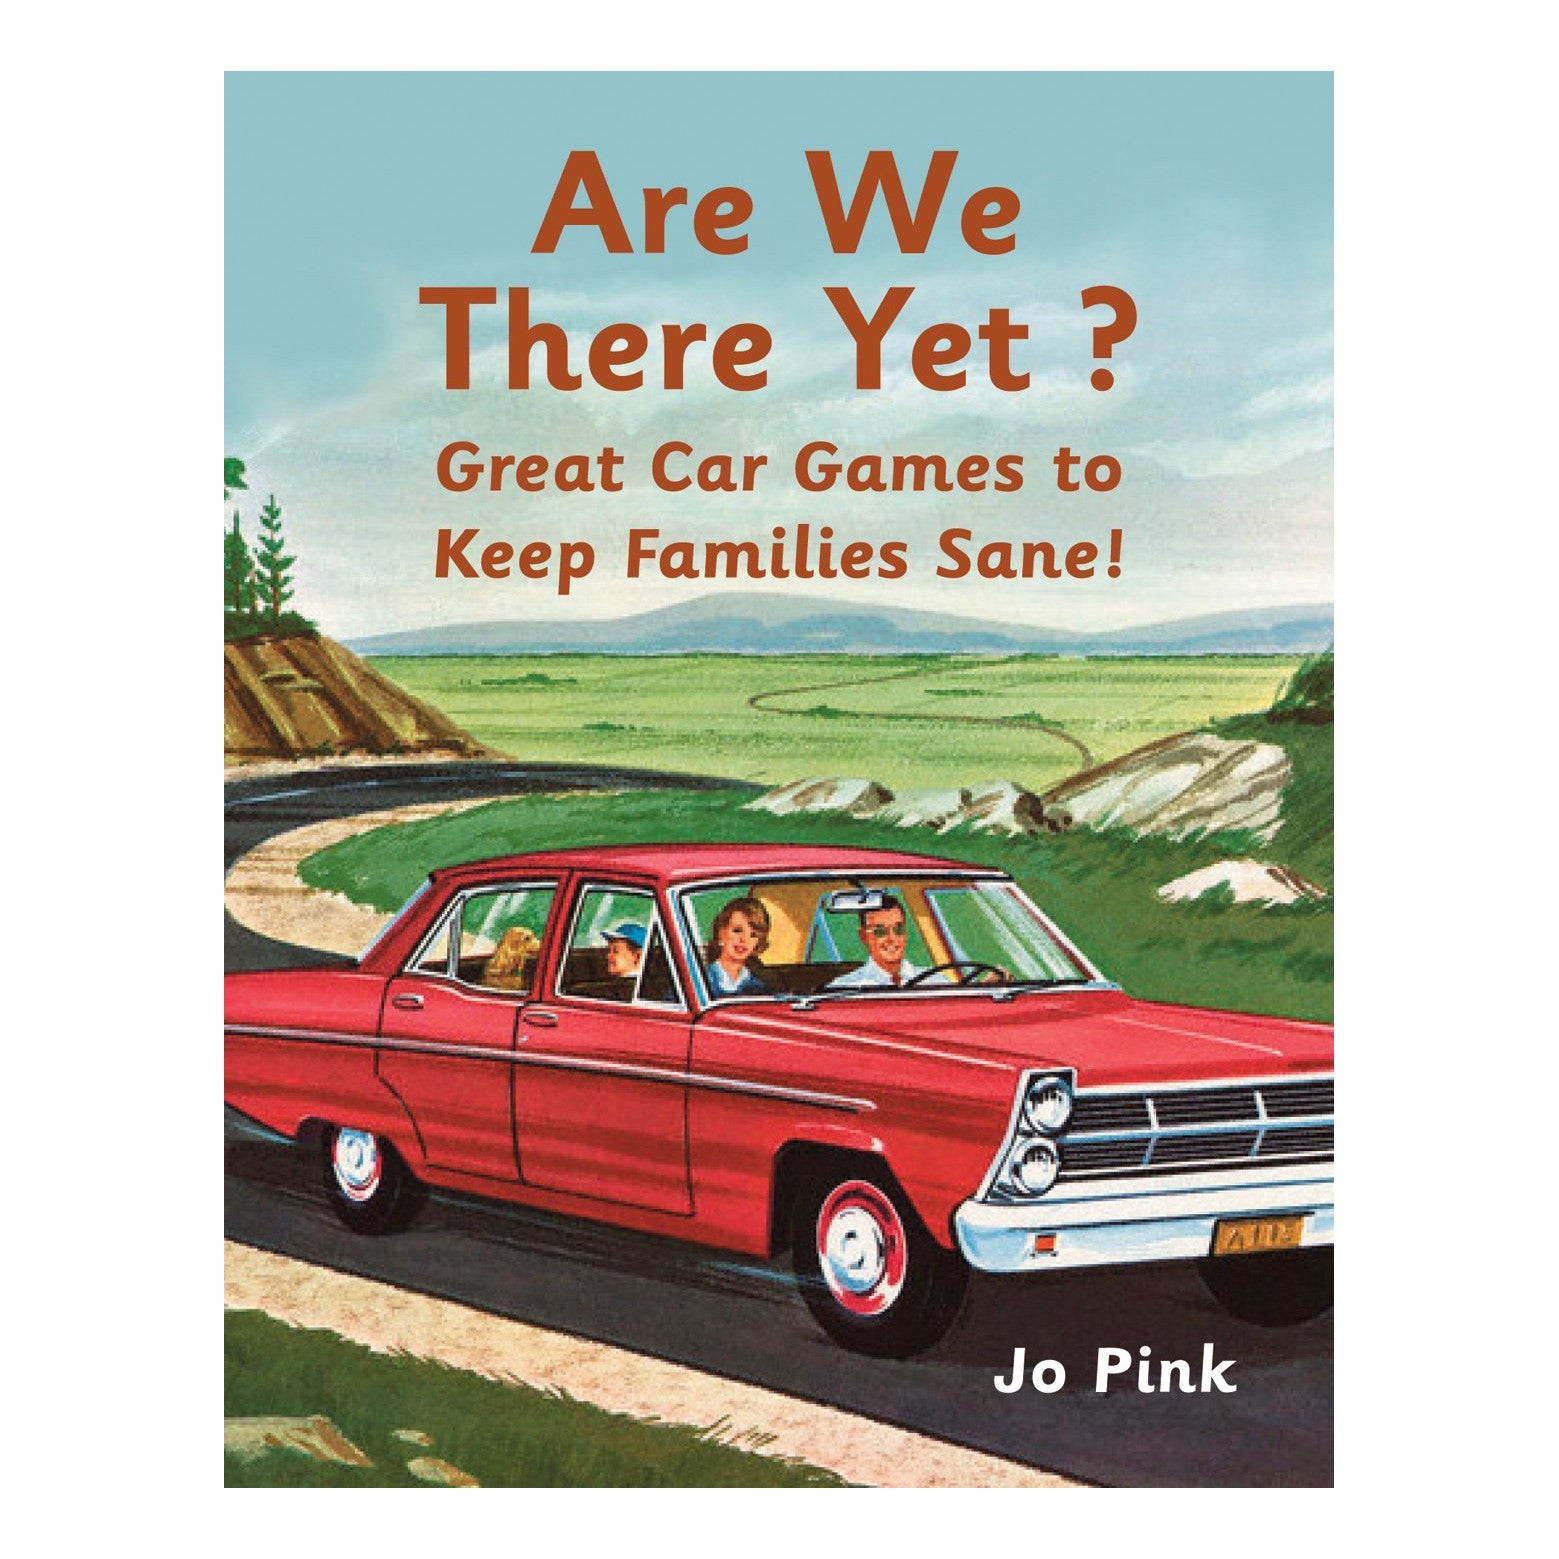 Are We There Yet? Great Car Games to Keep Families Sane